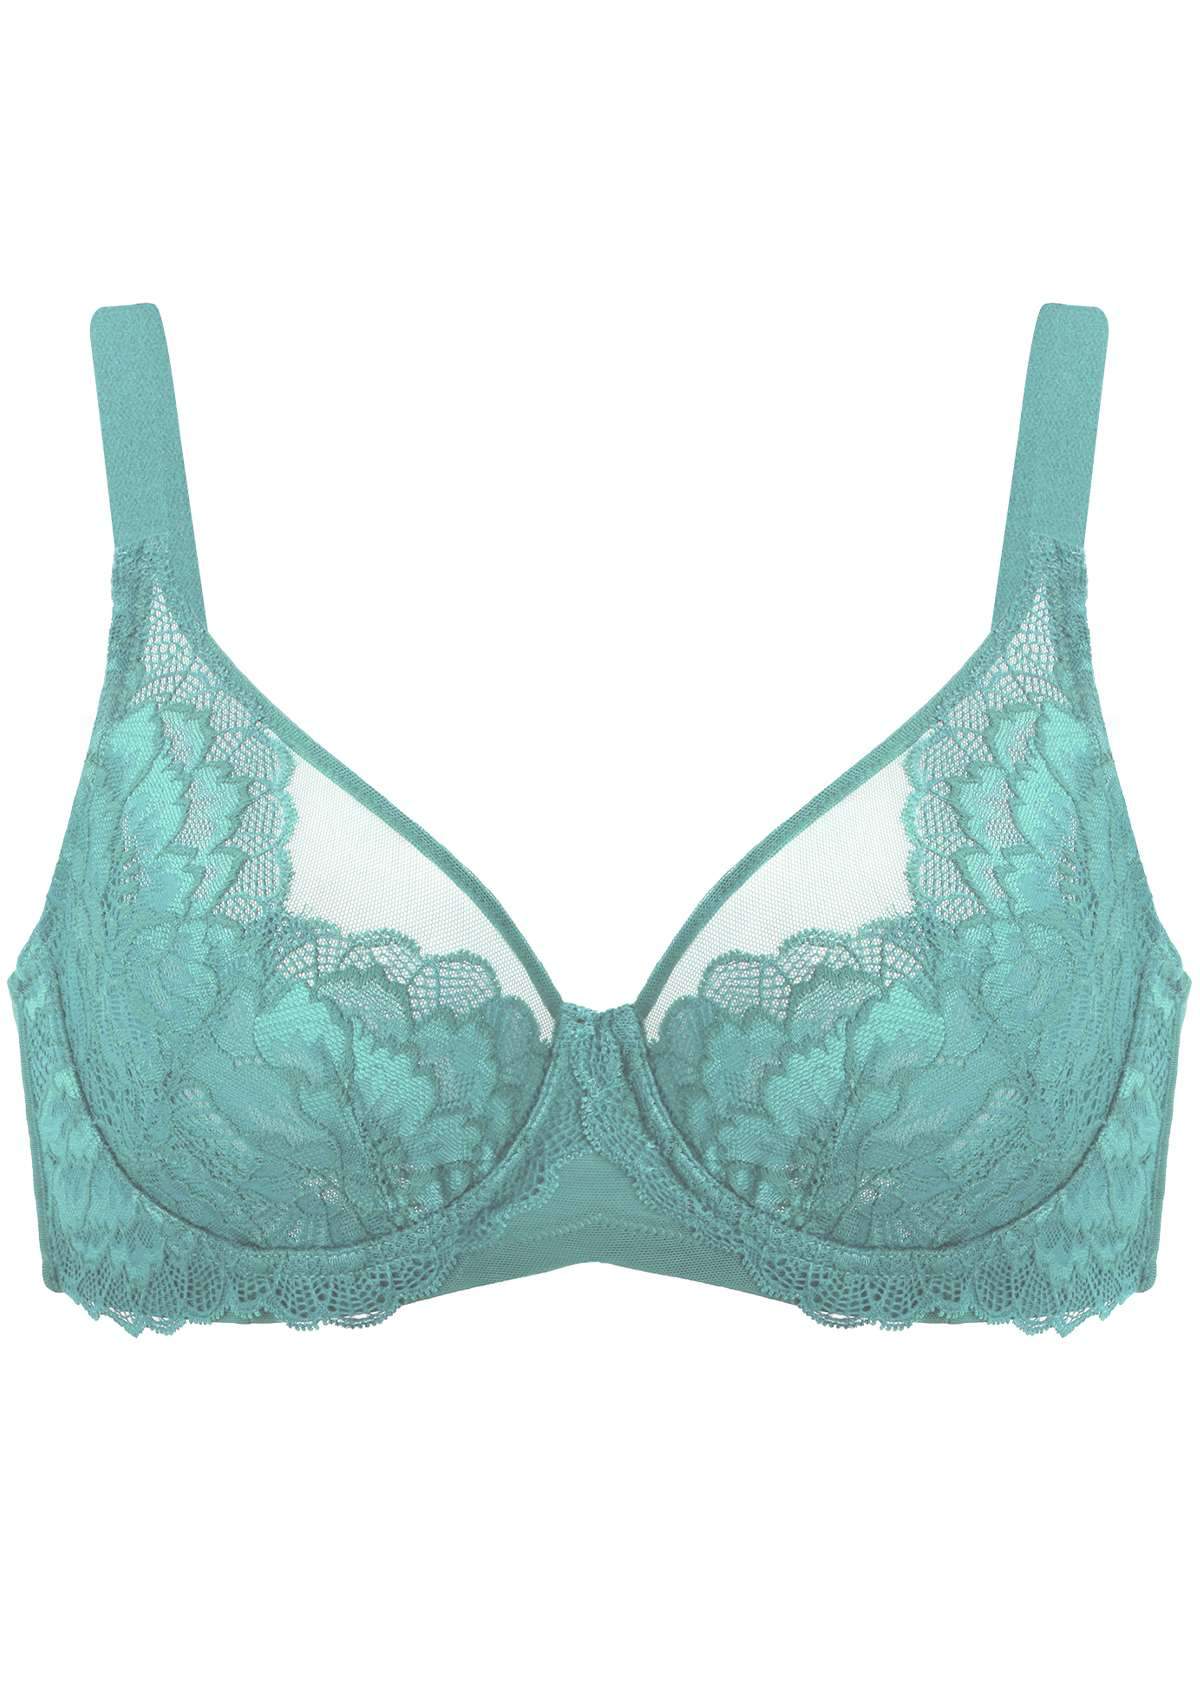 HSIA Paeonia Lace Full Coverage Underwire Non-Padded Uplifting Bra - Light Coral / 36 / C